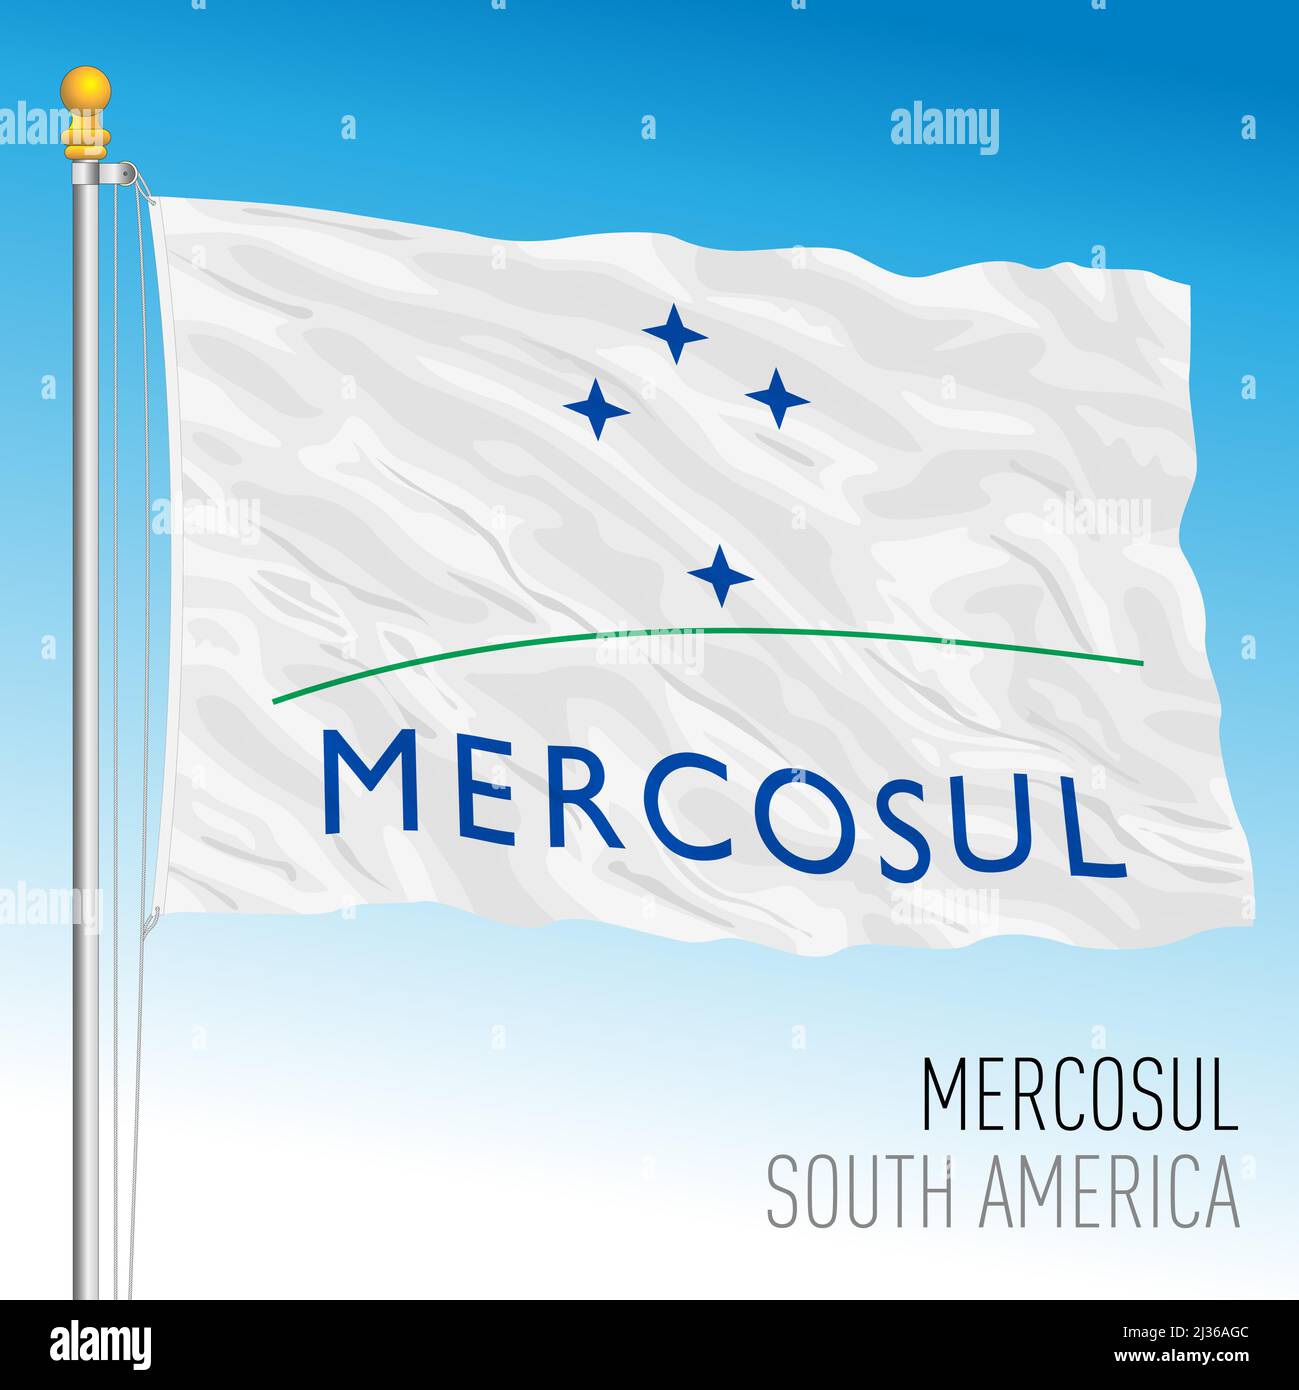 Mercosul organization flag, South America, Brazil, isolated on the white background, vector illustration Stock Vector